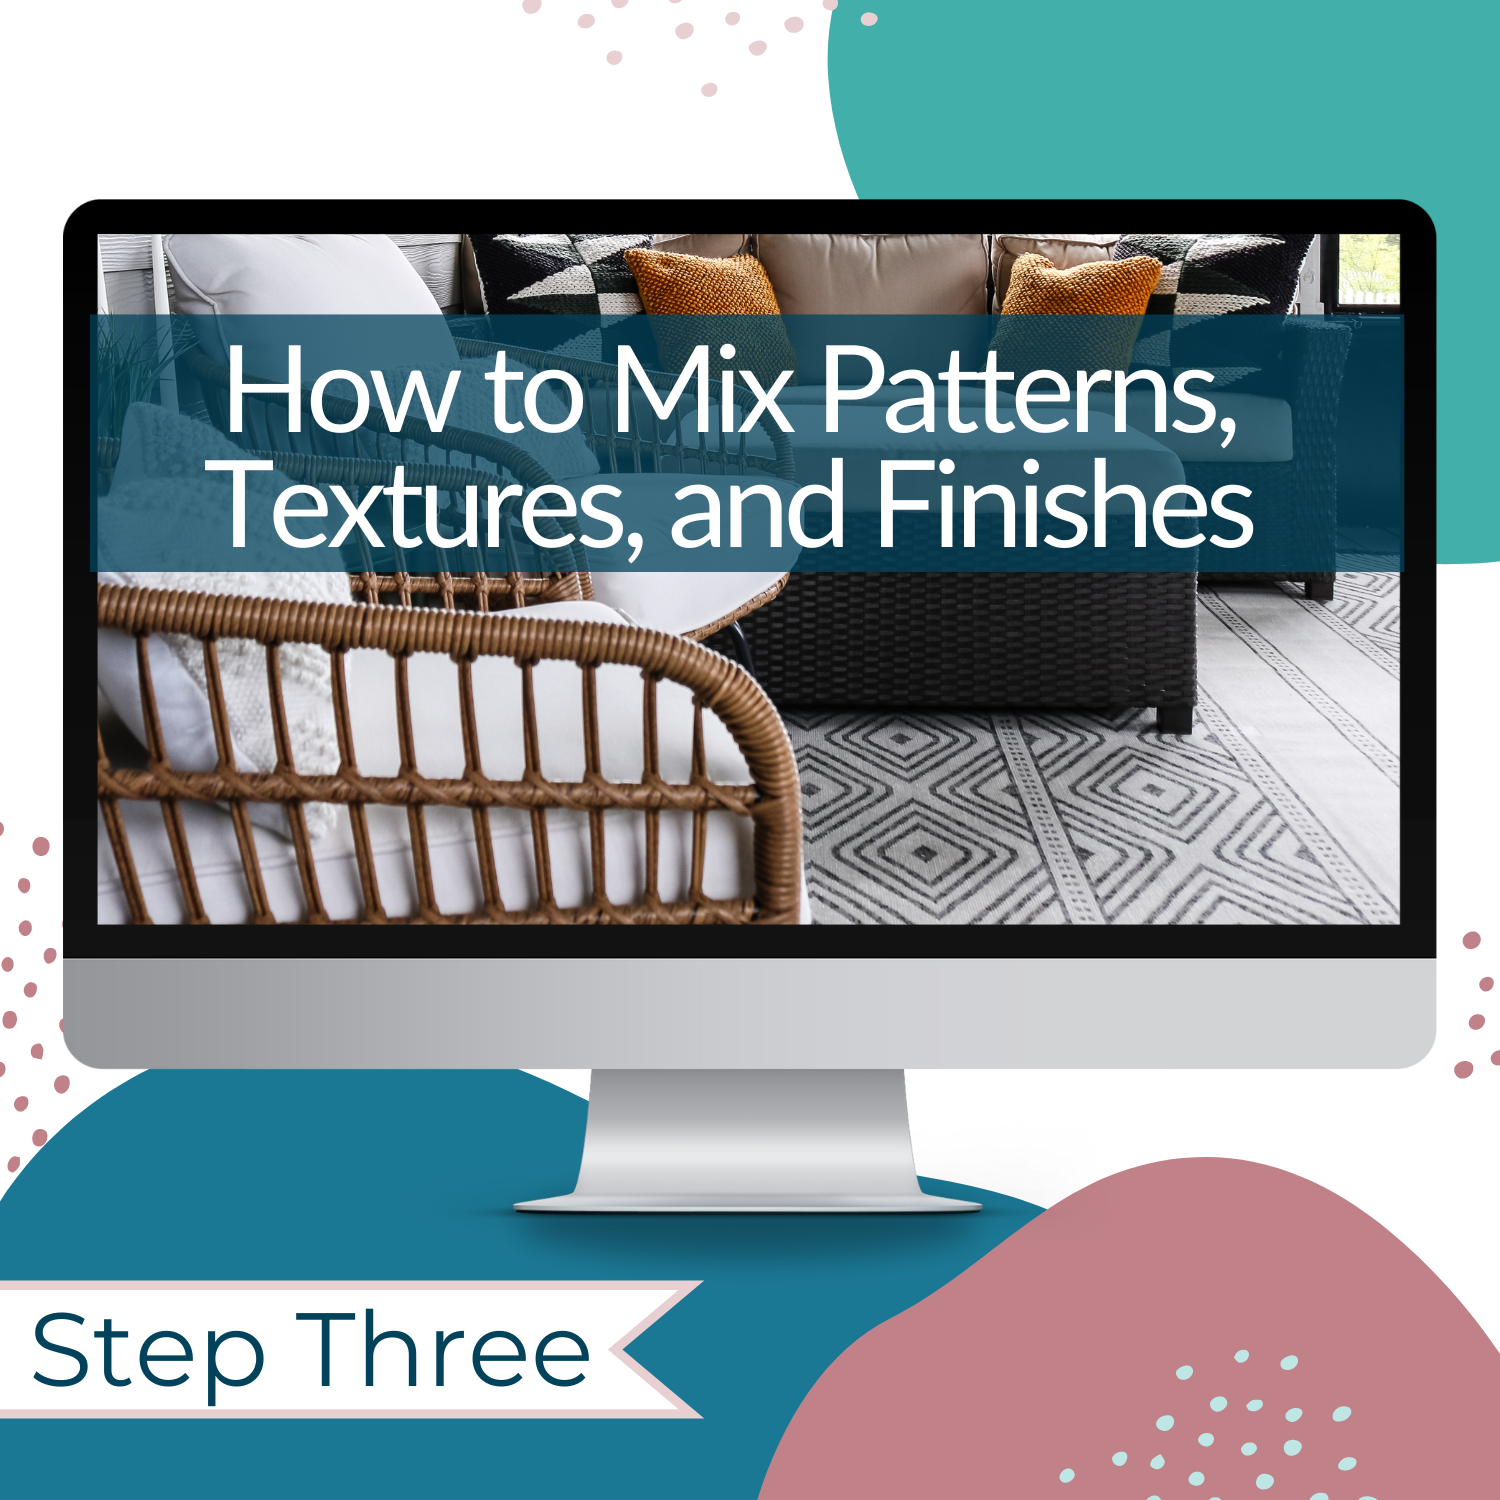 How to mix patterns, textures, and finishes for a cohesive look with the My Homier Home How to Mix Patterns, Textures, and Finishes Workshop.